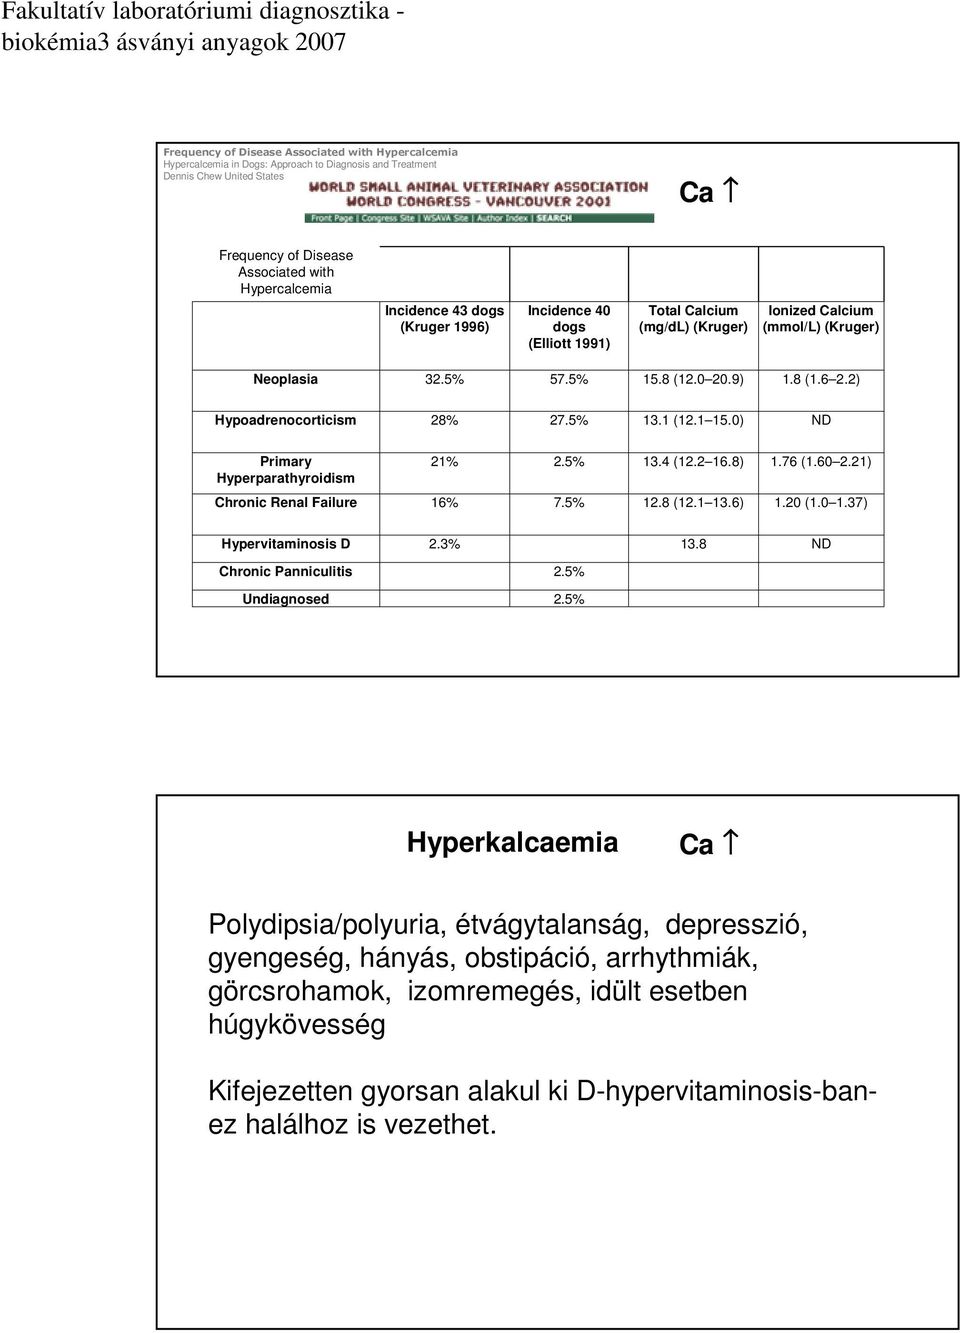 5% 13.1 (12.1 15.0) ND Primary Hyperparathyroidism 21% 2.5% 13.4 (12.2 16.8) 1.76 (1.60 2.21) Chronic Renal Failure 16% 7.5% 12.8 (12.1 13.6) 1.20 (1.0 1.37) Hypervitaminosis D 2.3% 13.